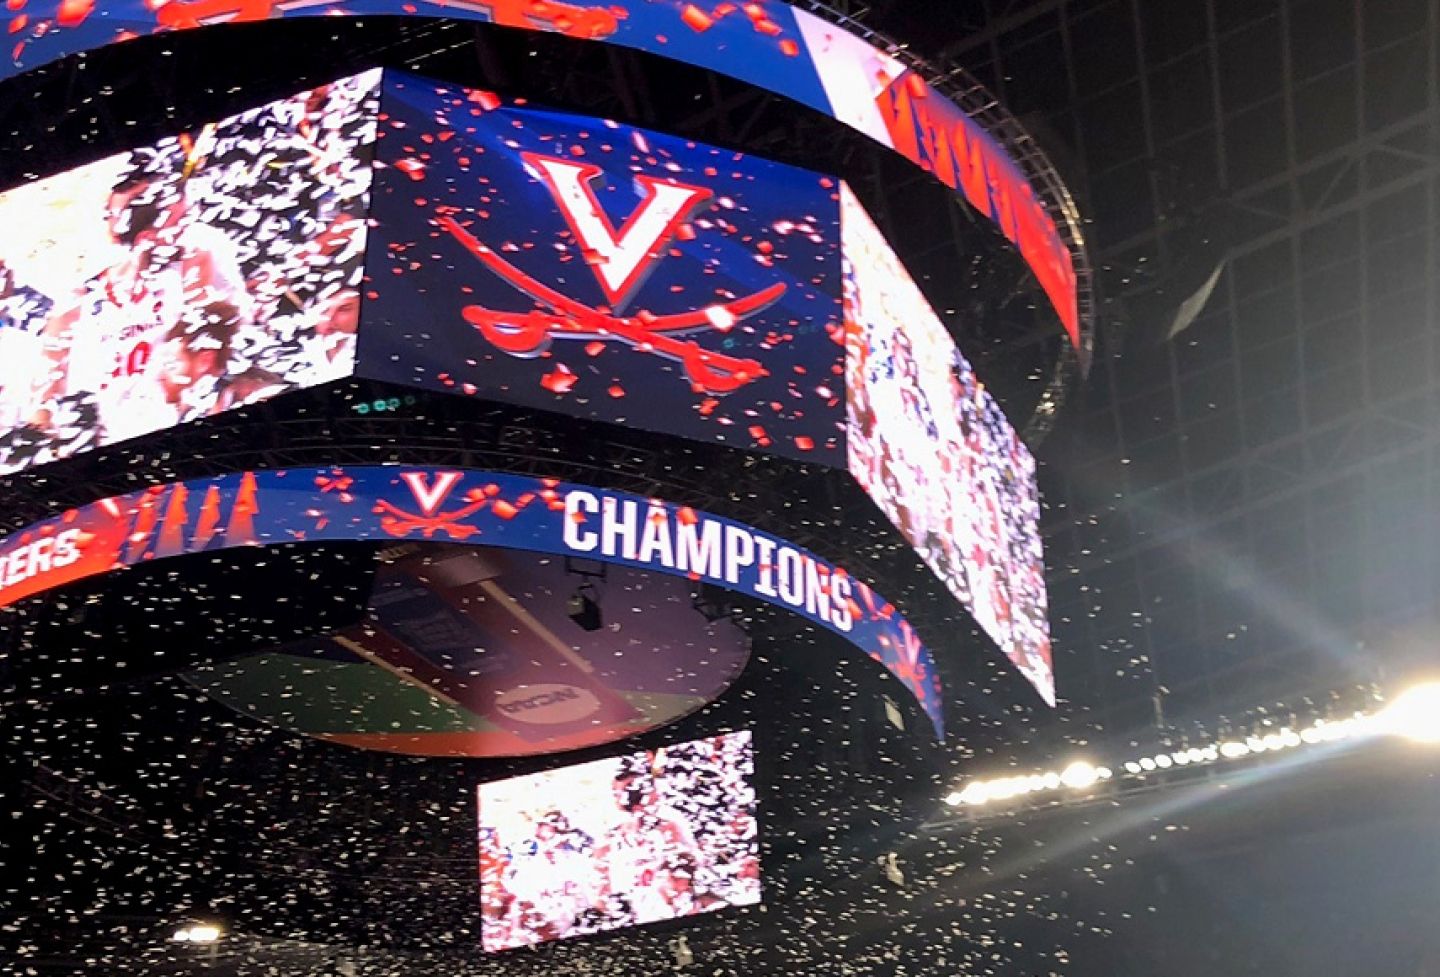 The Law School community cheered on the Virginia men’s basketball team during a historic Final Four run en route to a national championship in April, and Dean Risa Goluboff and Vice Dean Leslie Kendrick ’06 cheered the team at the final game, along with President Jim Ryan ’92.